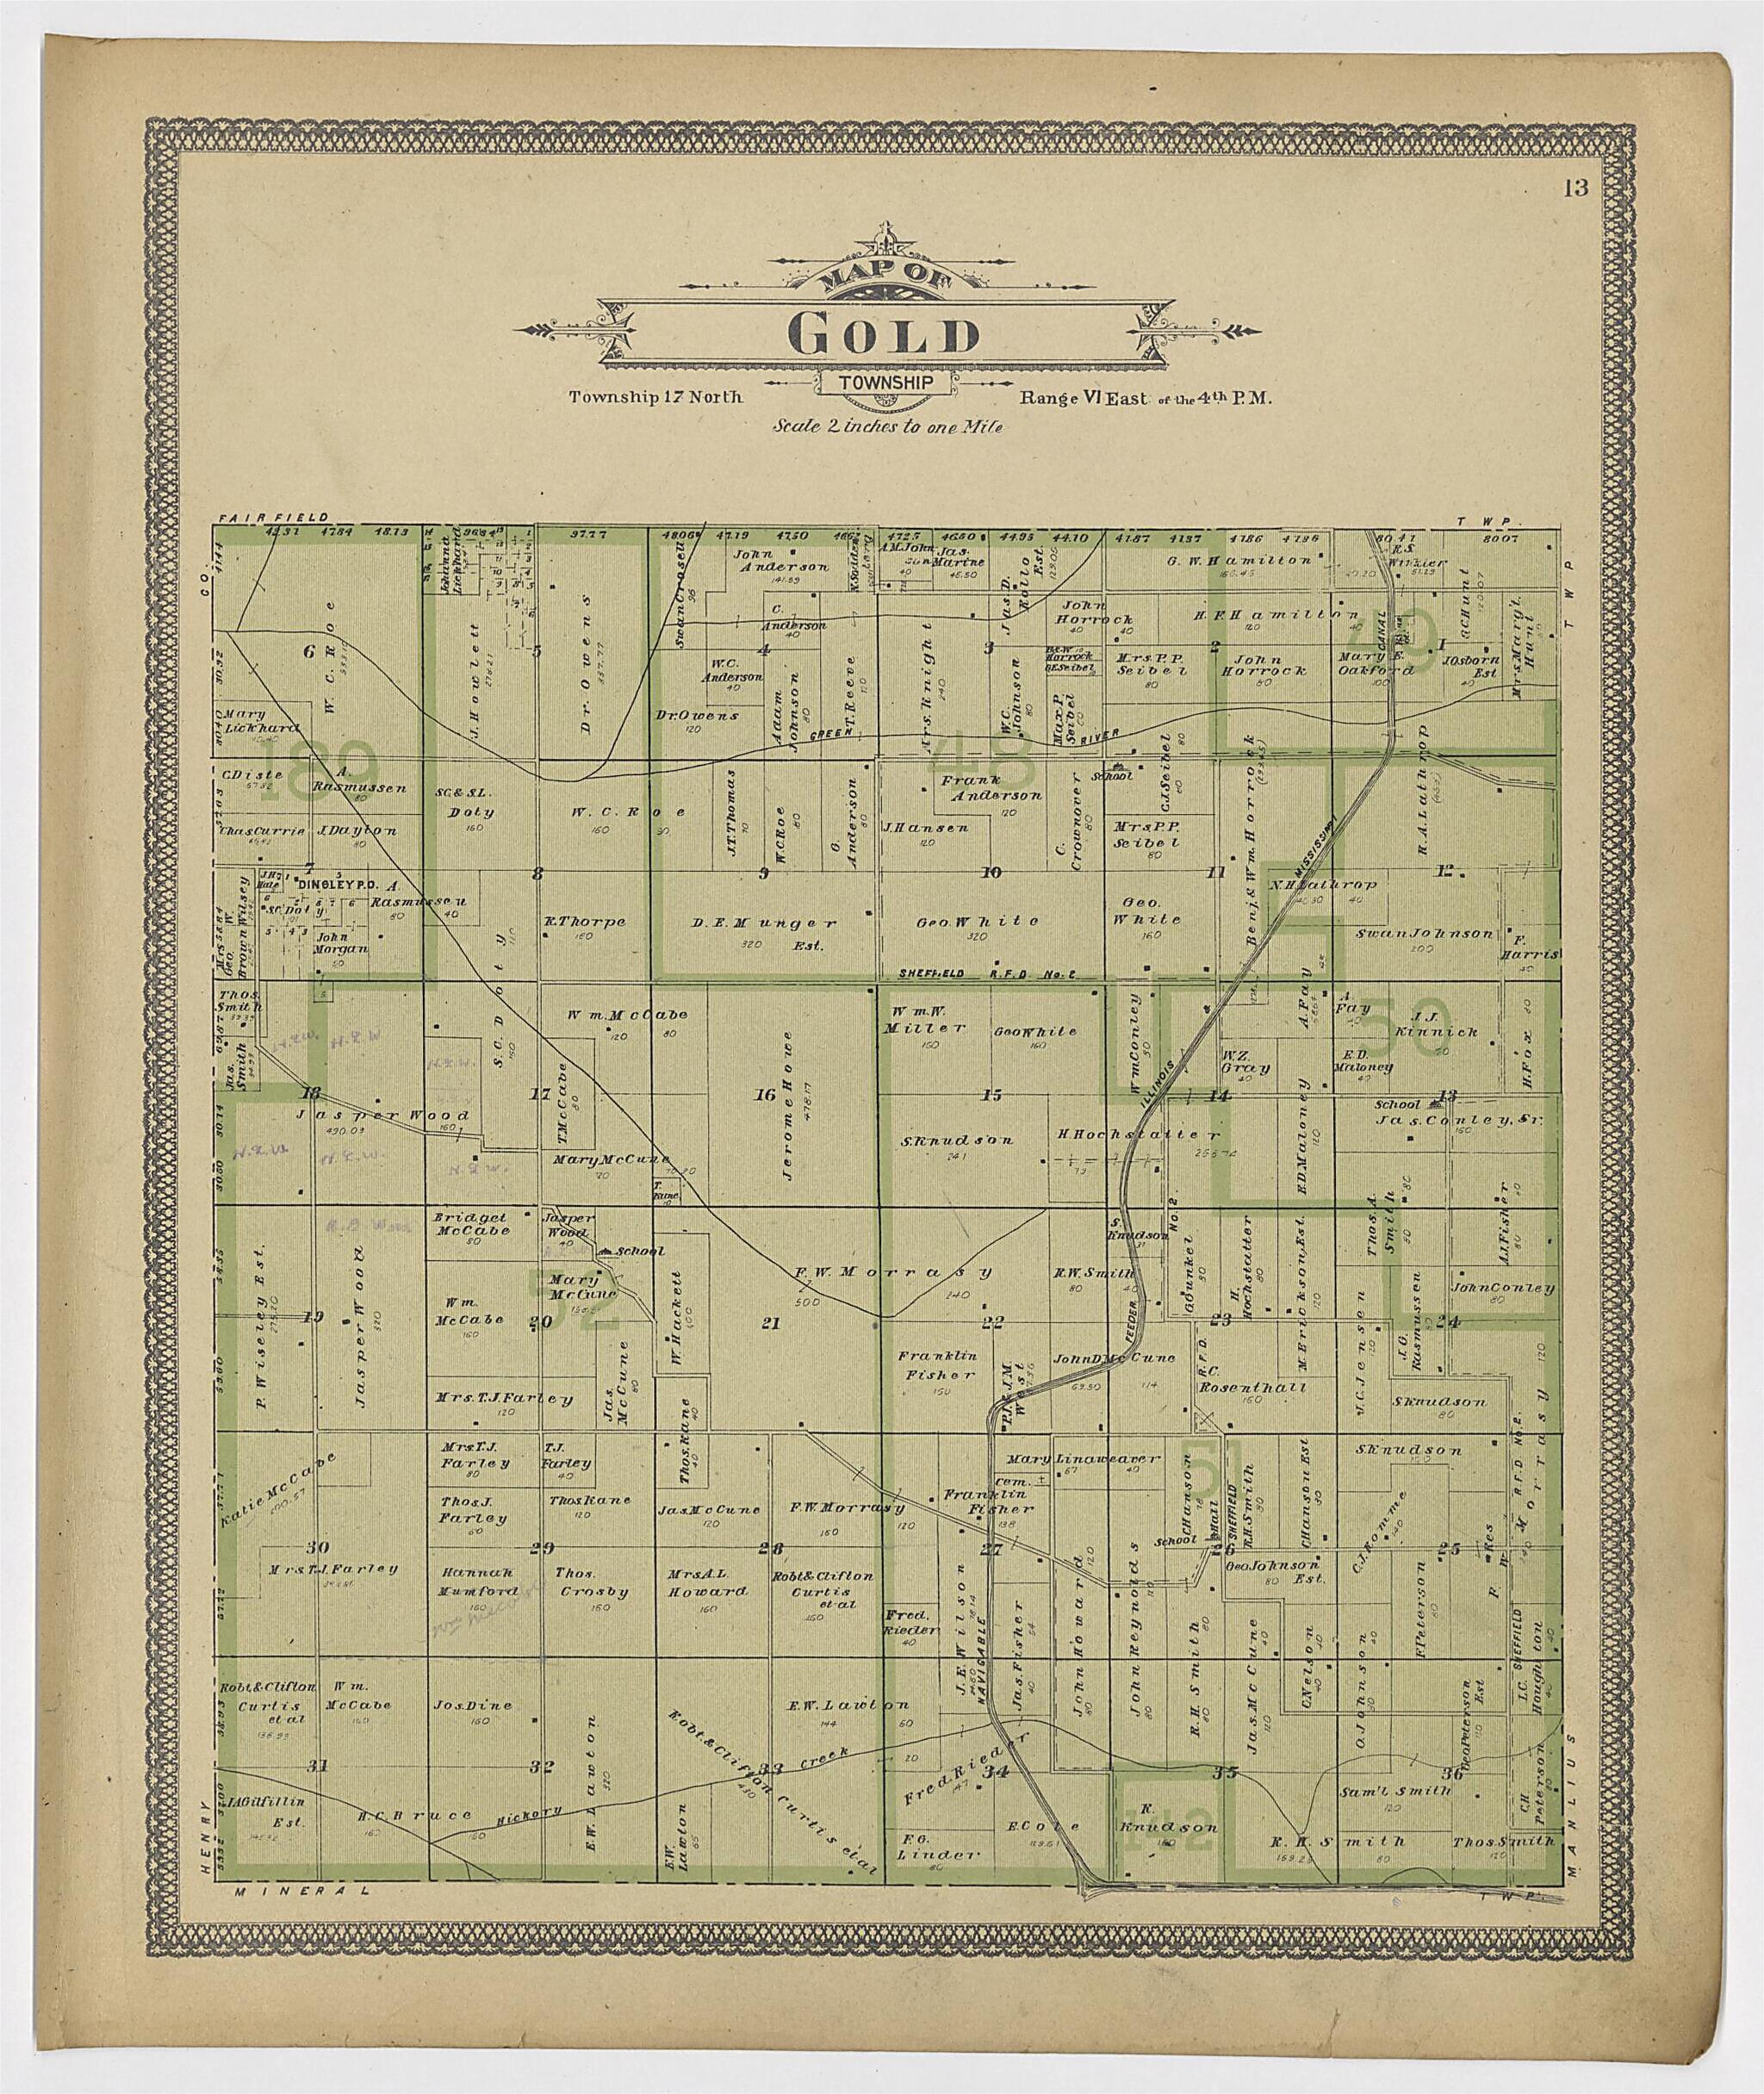 This old map of Image 8 of 20th Century Atlas of Bureau County, Illinois from Atlas of Bureau County, Illinois from 1905 was created by  Middle-West Publishing Co in 1905